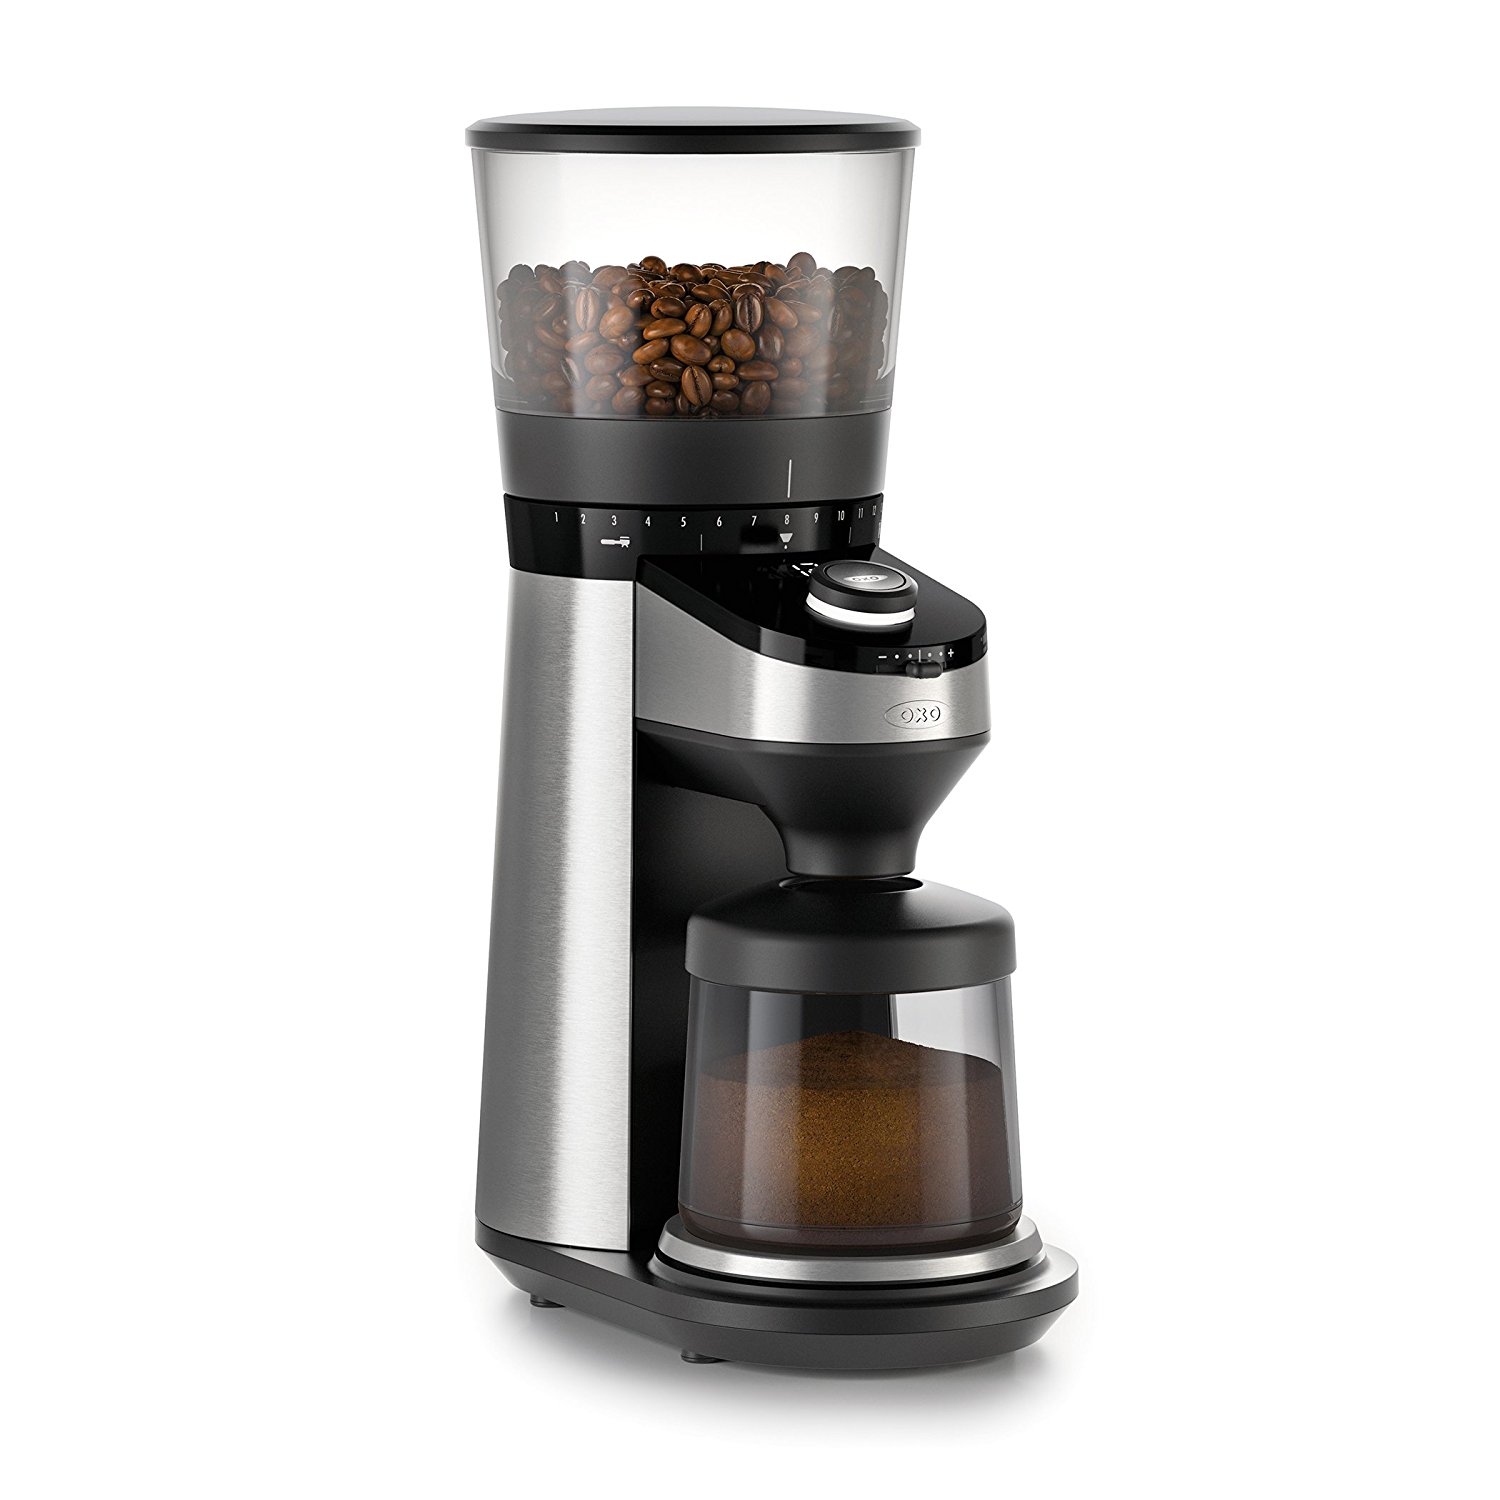 Amazon.com: OXO On Conical Burr Coffee Grinder with Integrated Scale ...